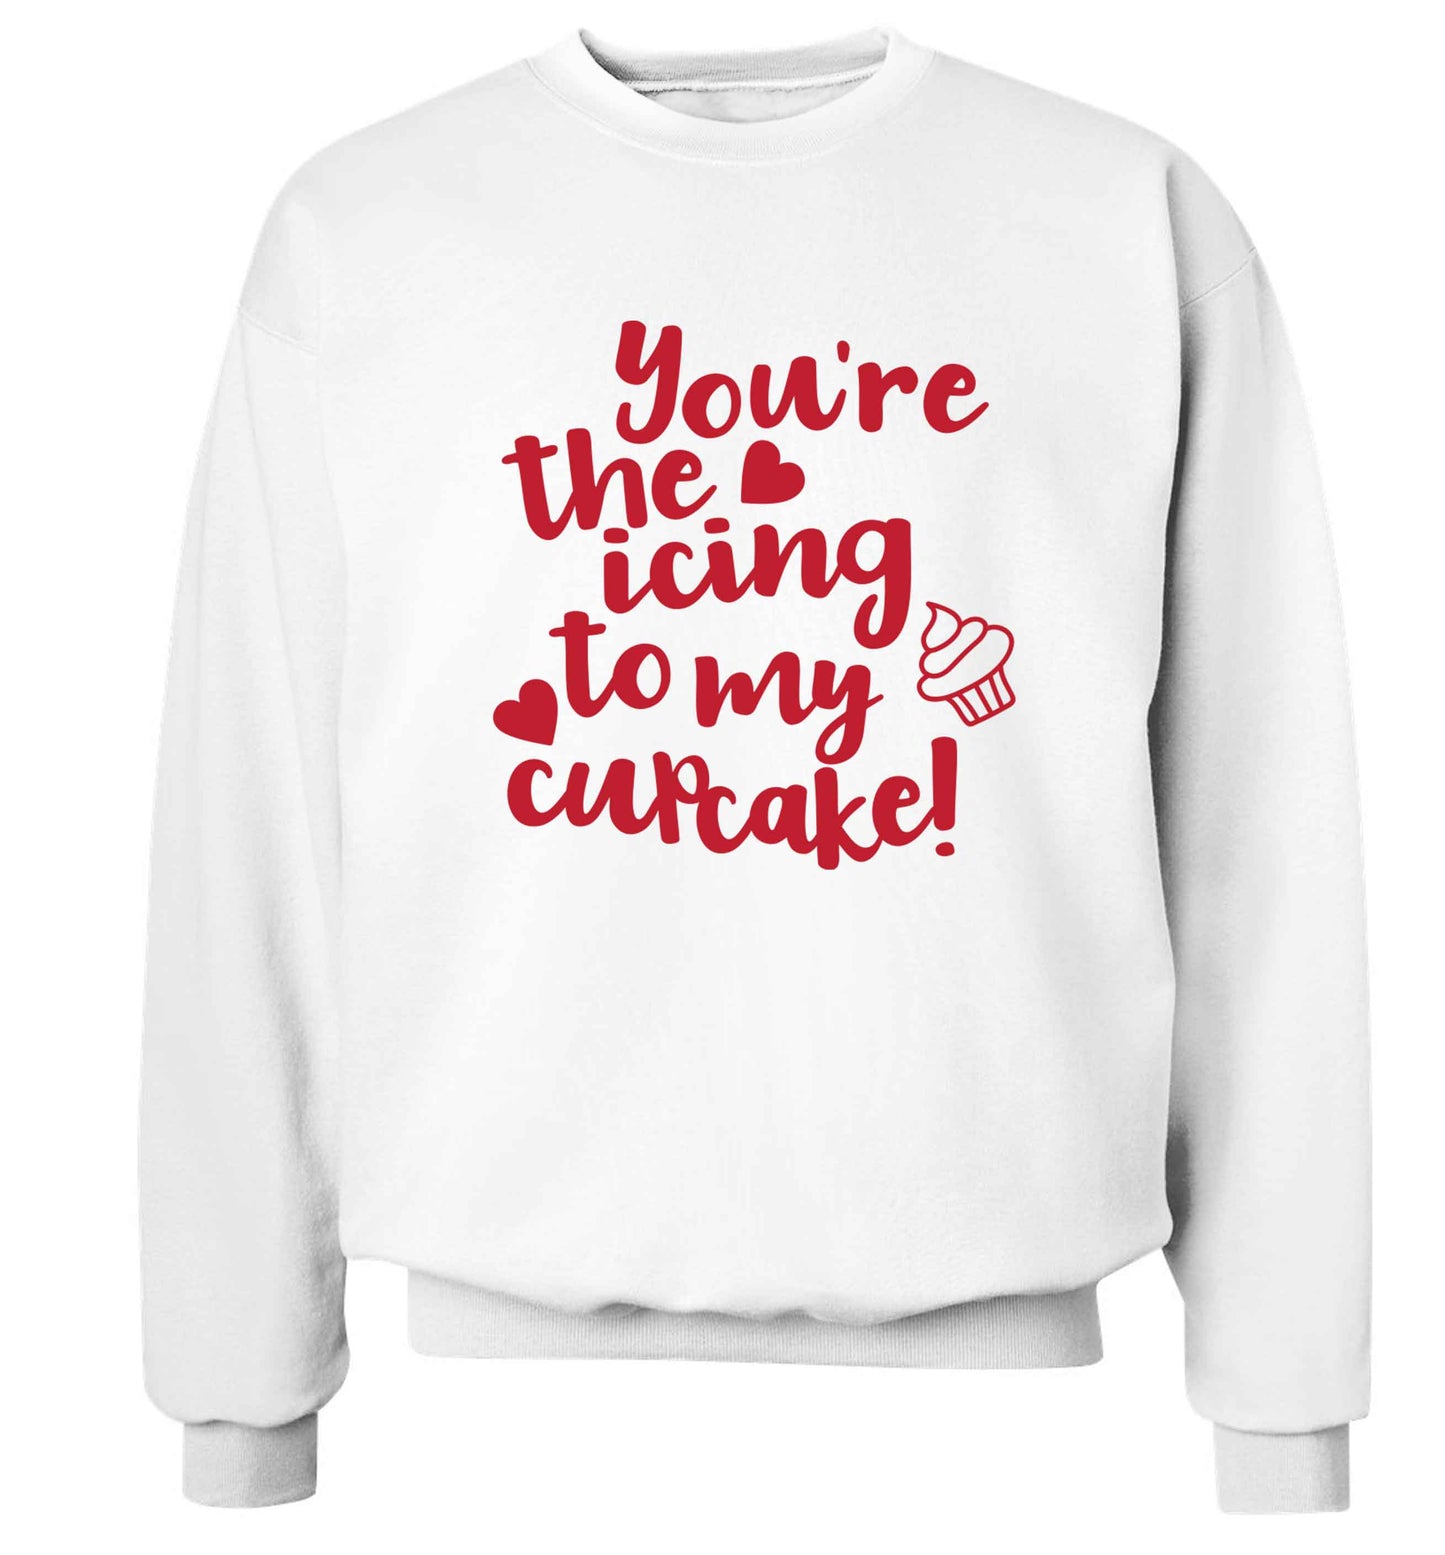 You're the icing to my cupcake Adult's unisex white Sweater 2XL